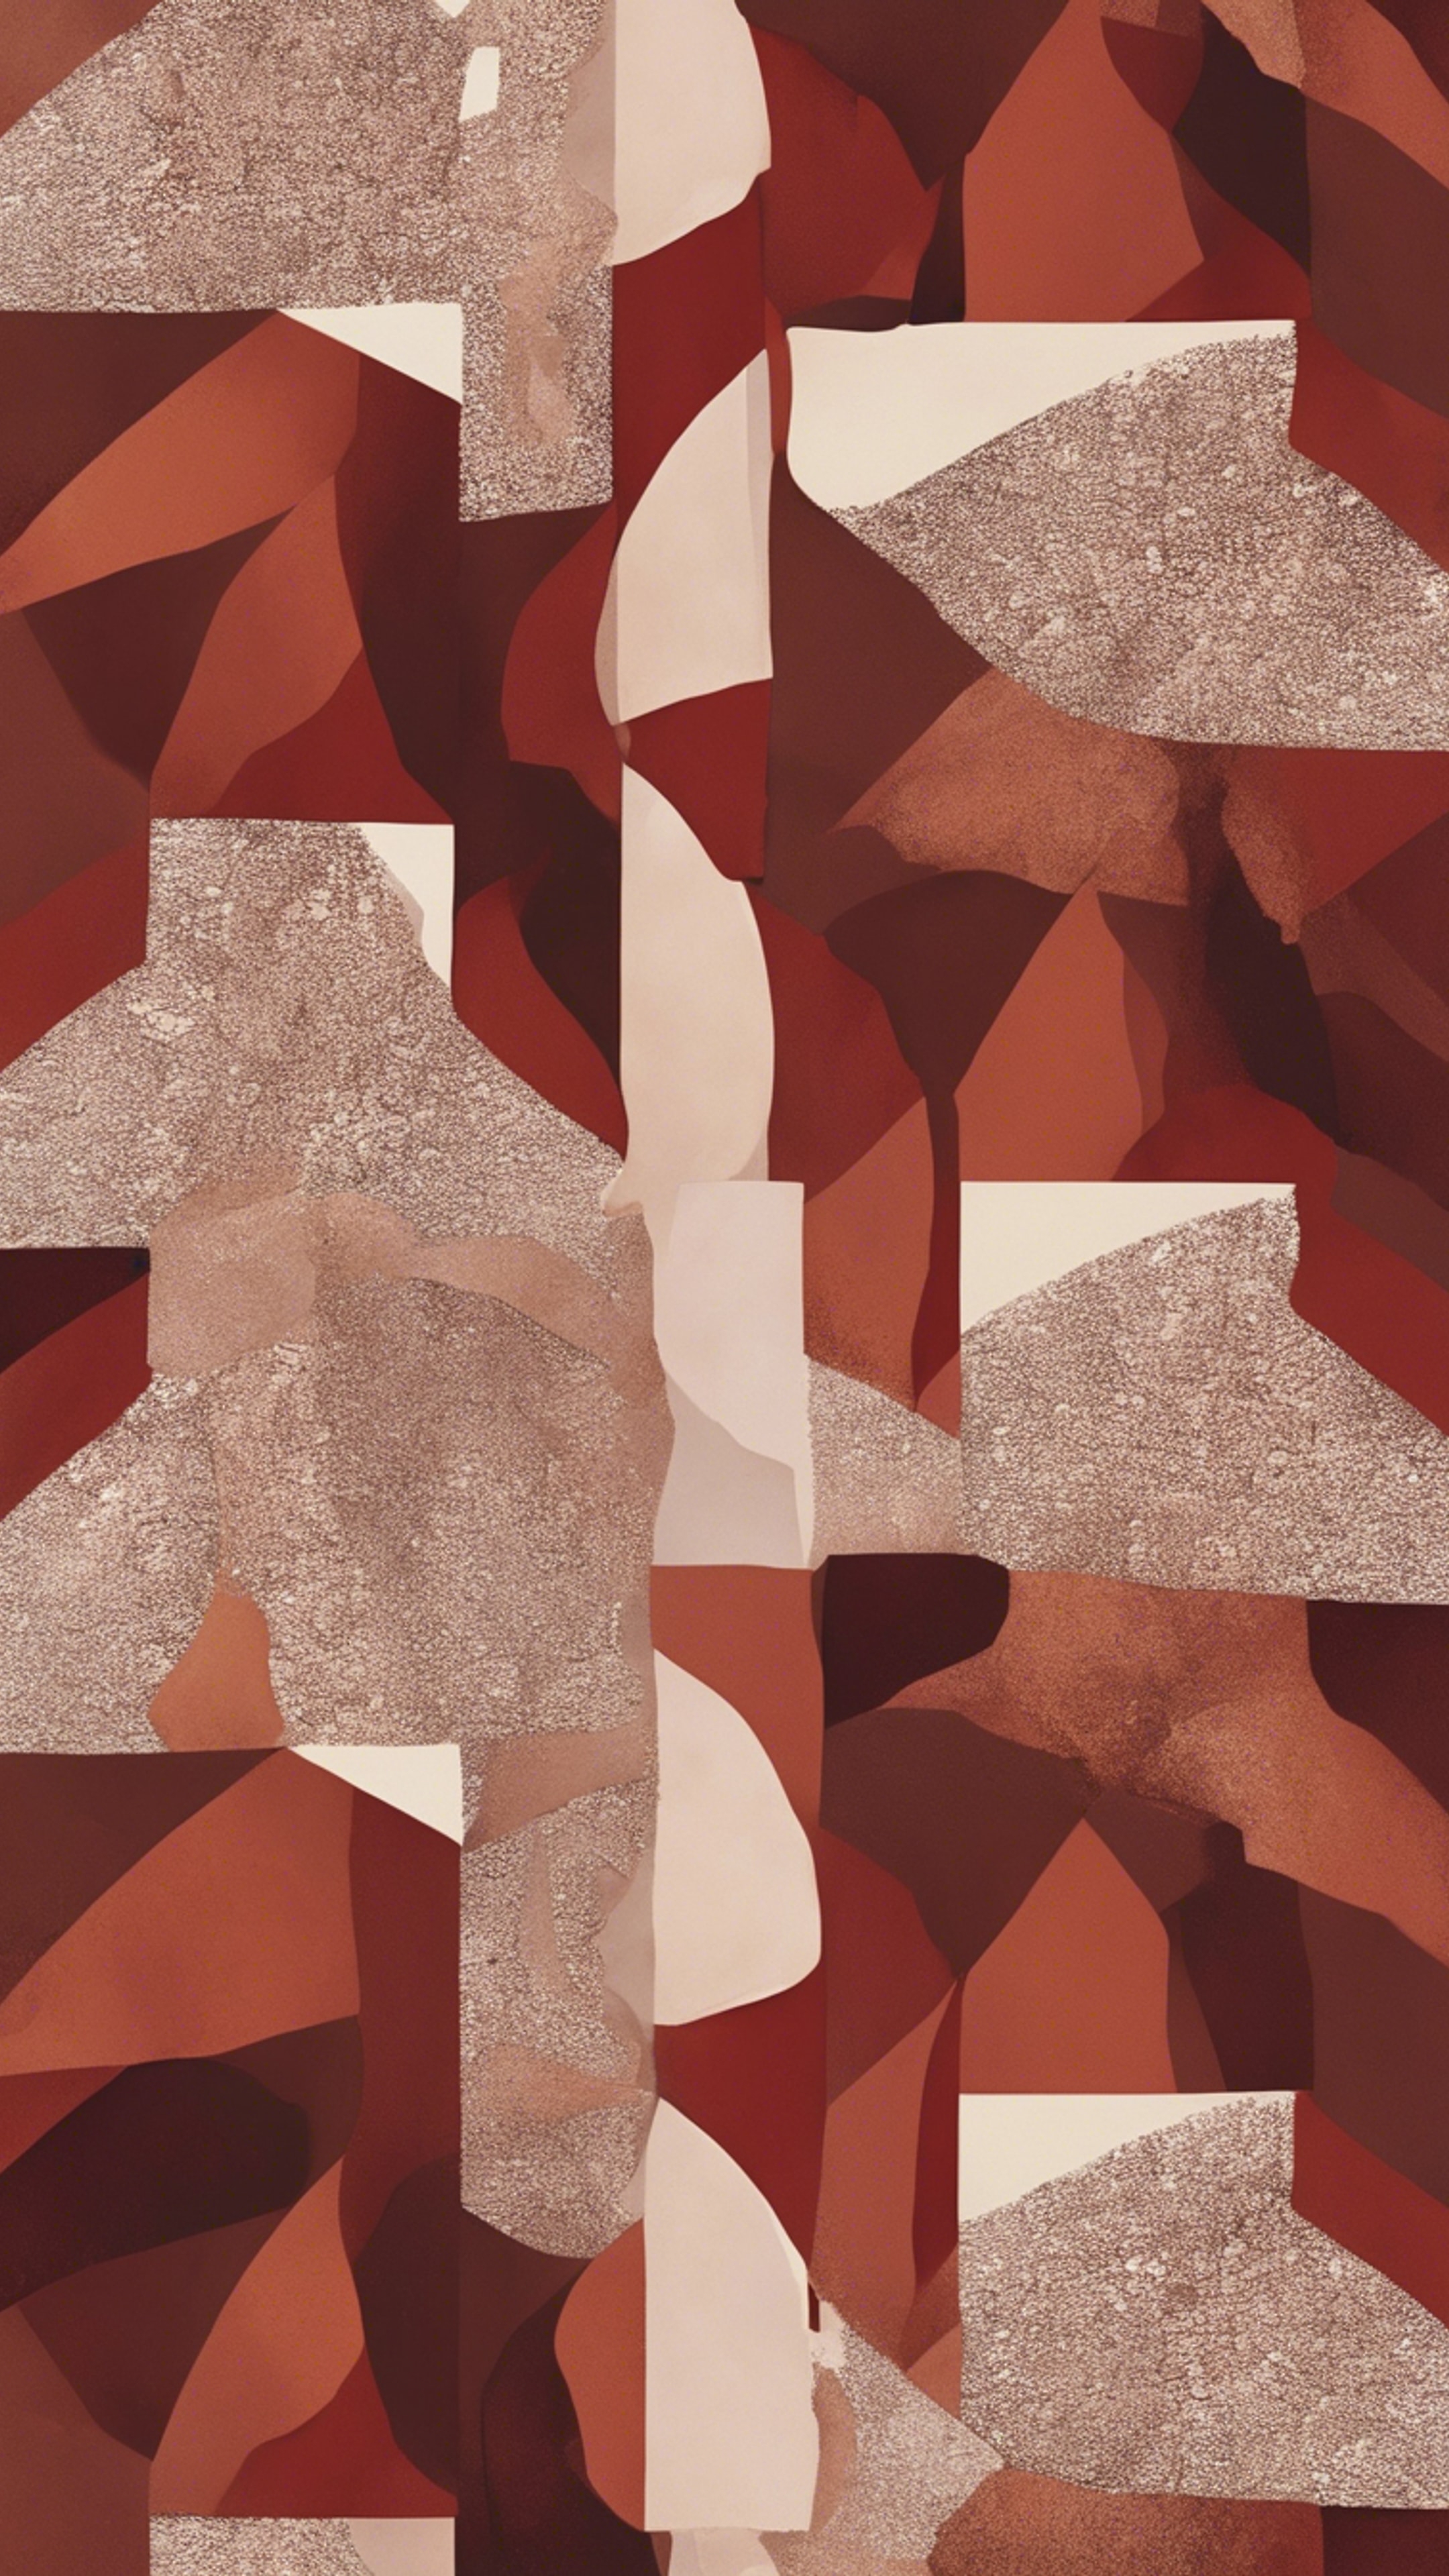 Irregular shapes in rich red and earthy brown hues, artfully scattered to form a unique abstract pattern. Wallpaper[9609e37b054b4aa6bf8e]